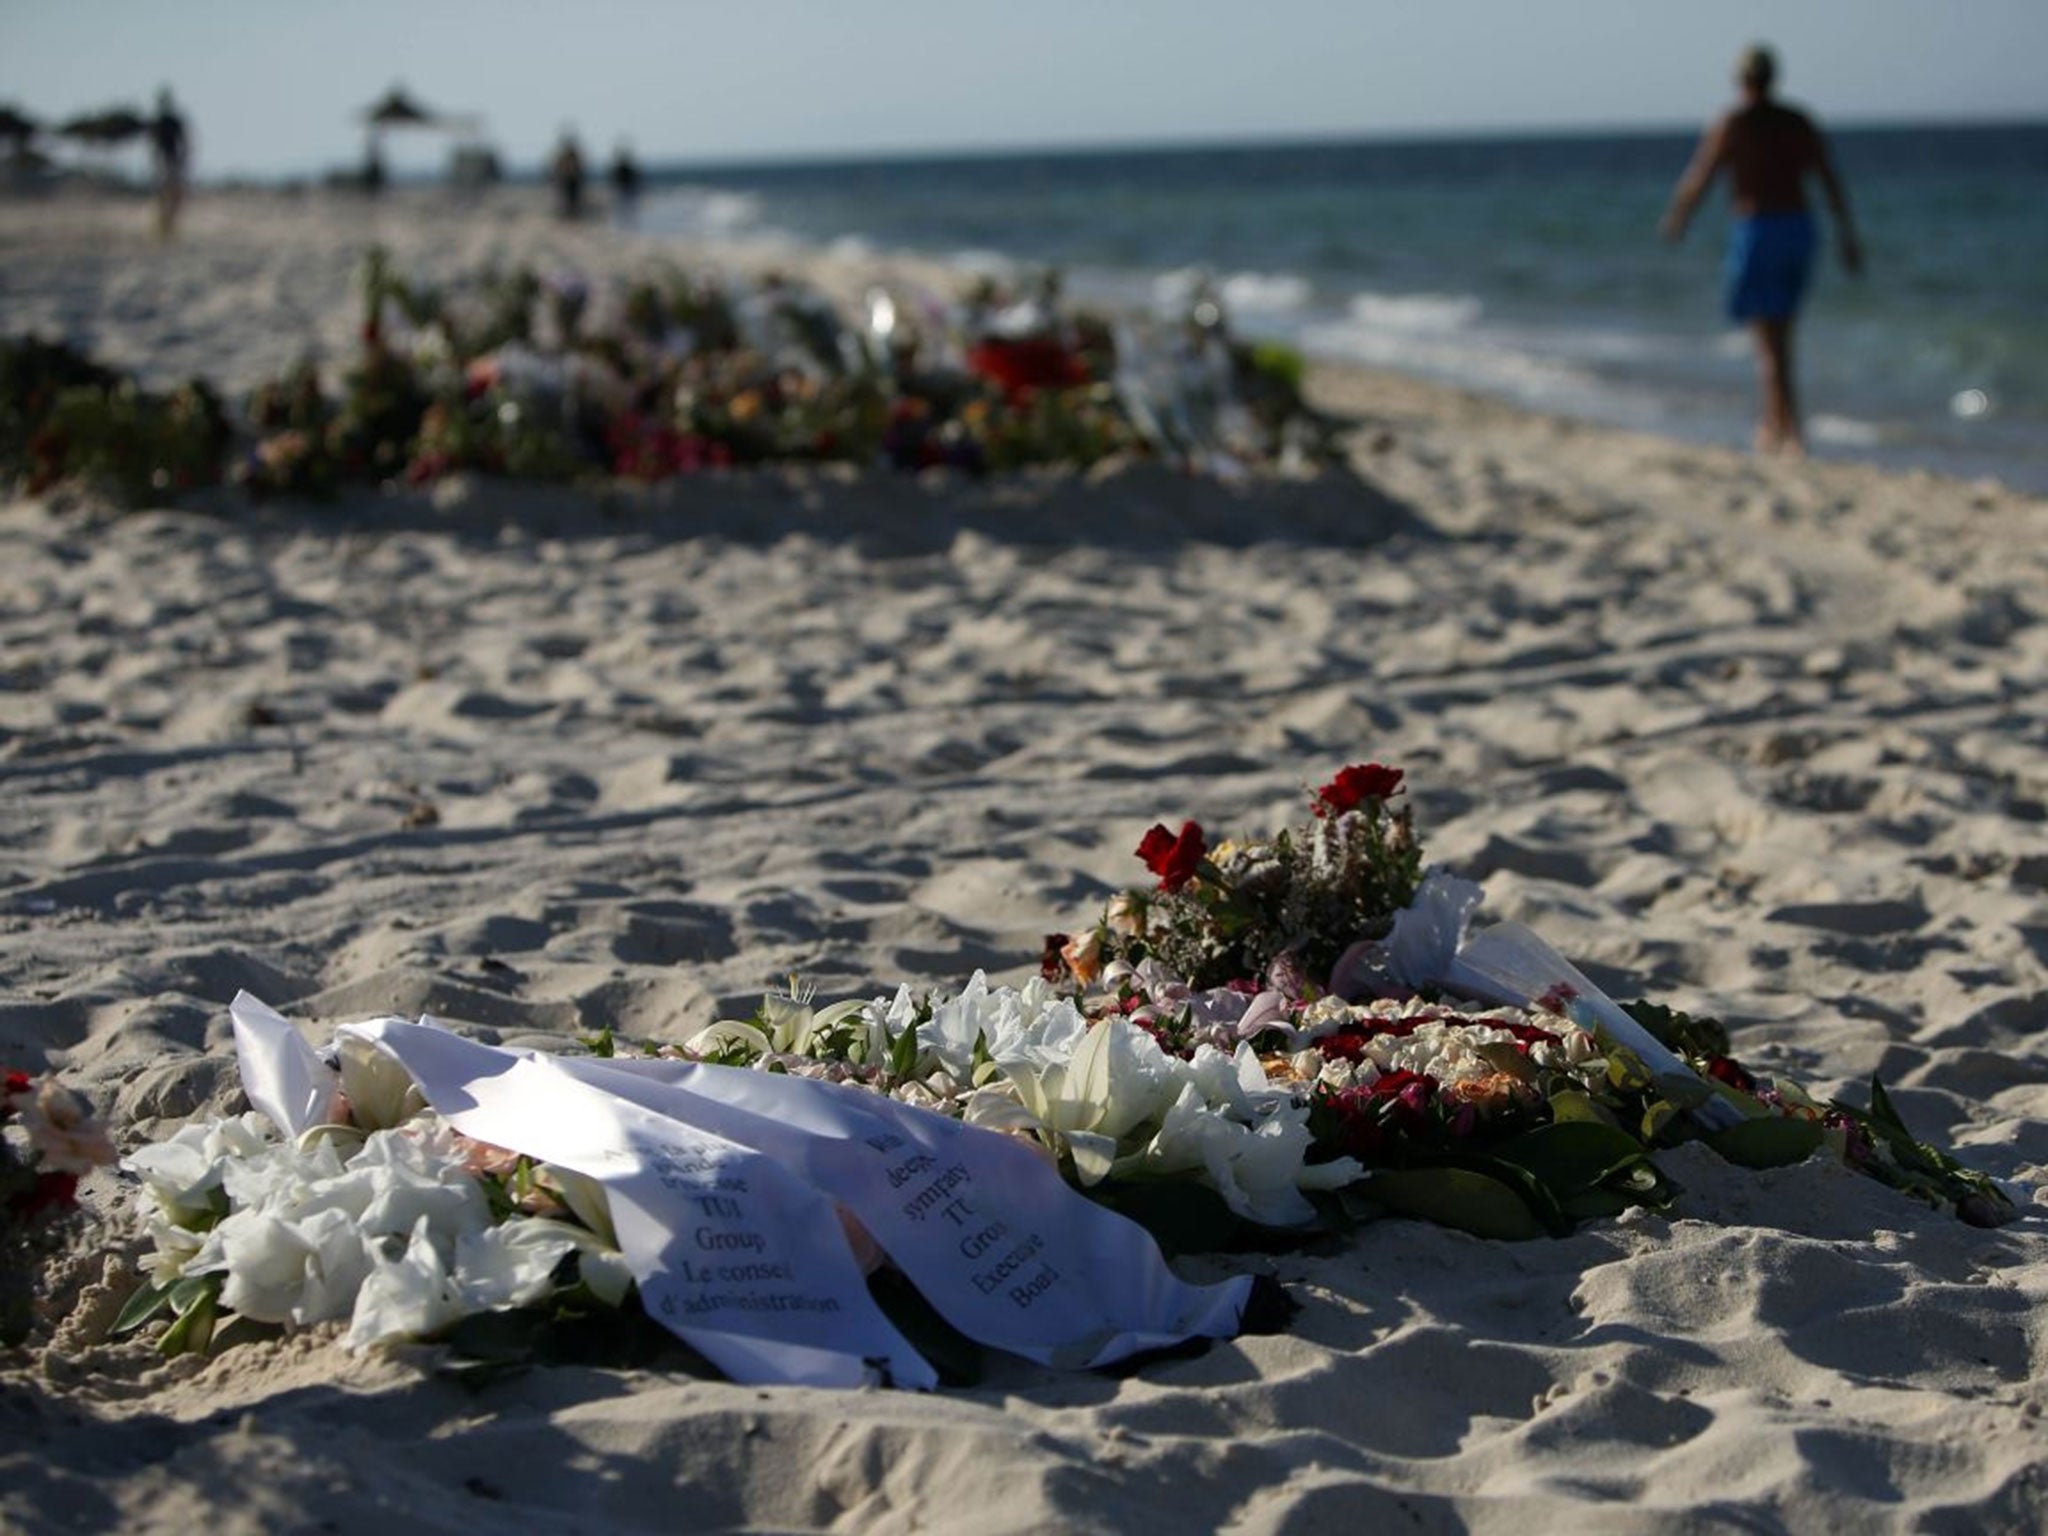 Tributes lie on the beach near the RIU Imperial Marhaba hotel in Sousse, Tunisia, following the terror attacks on the beach.